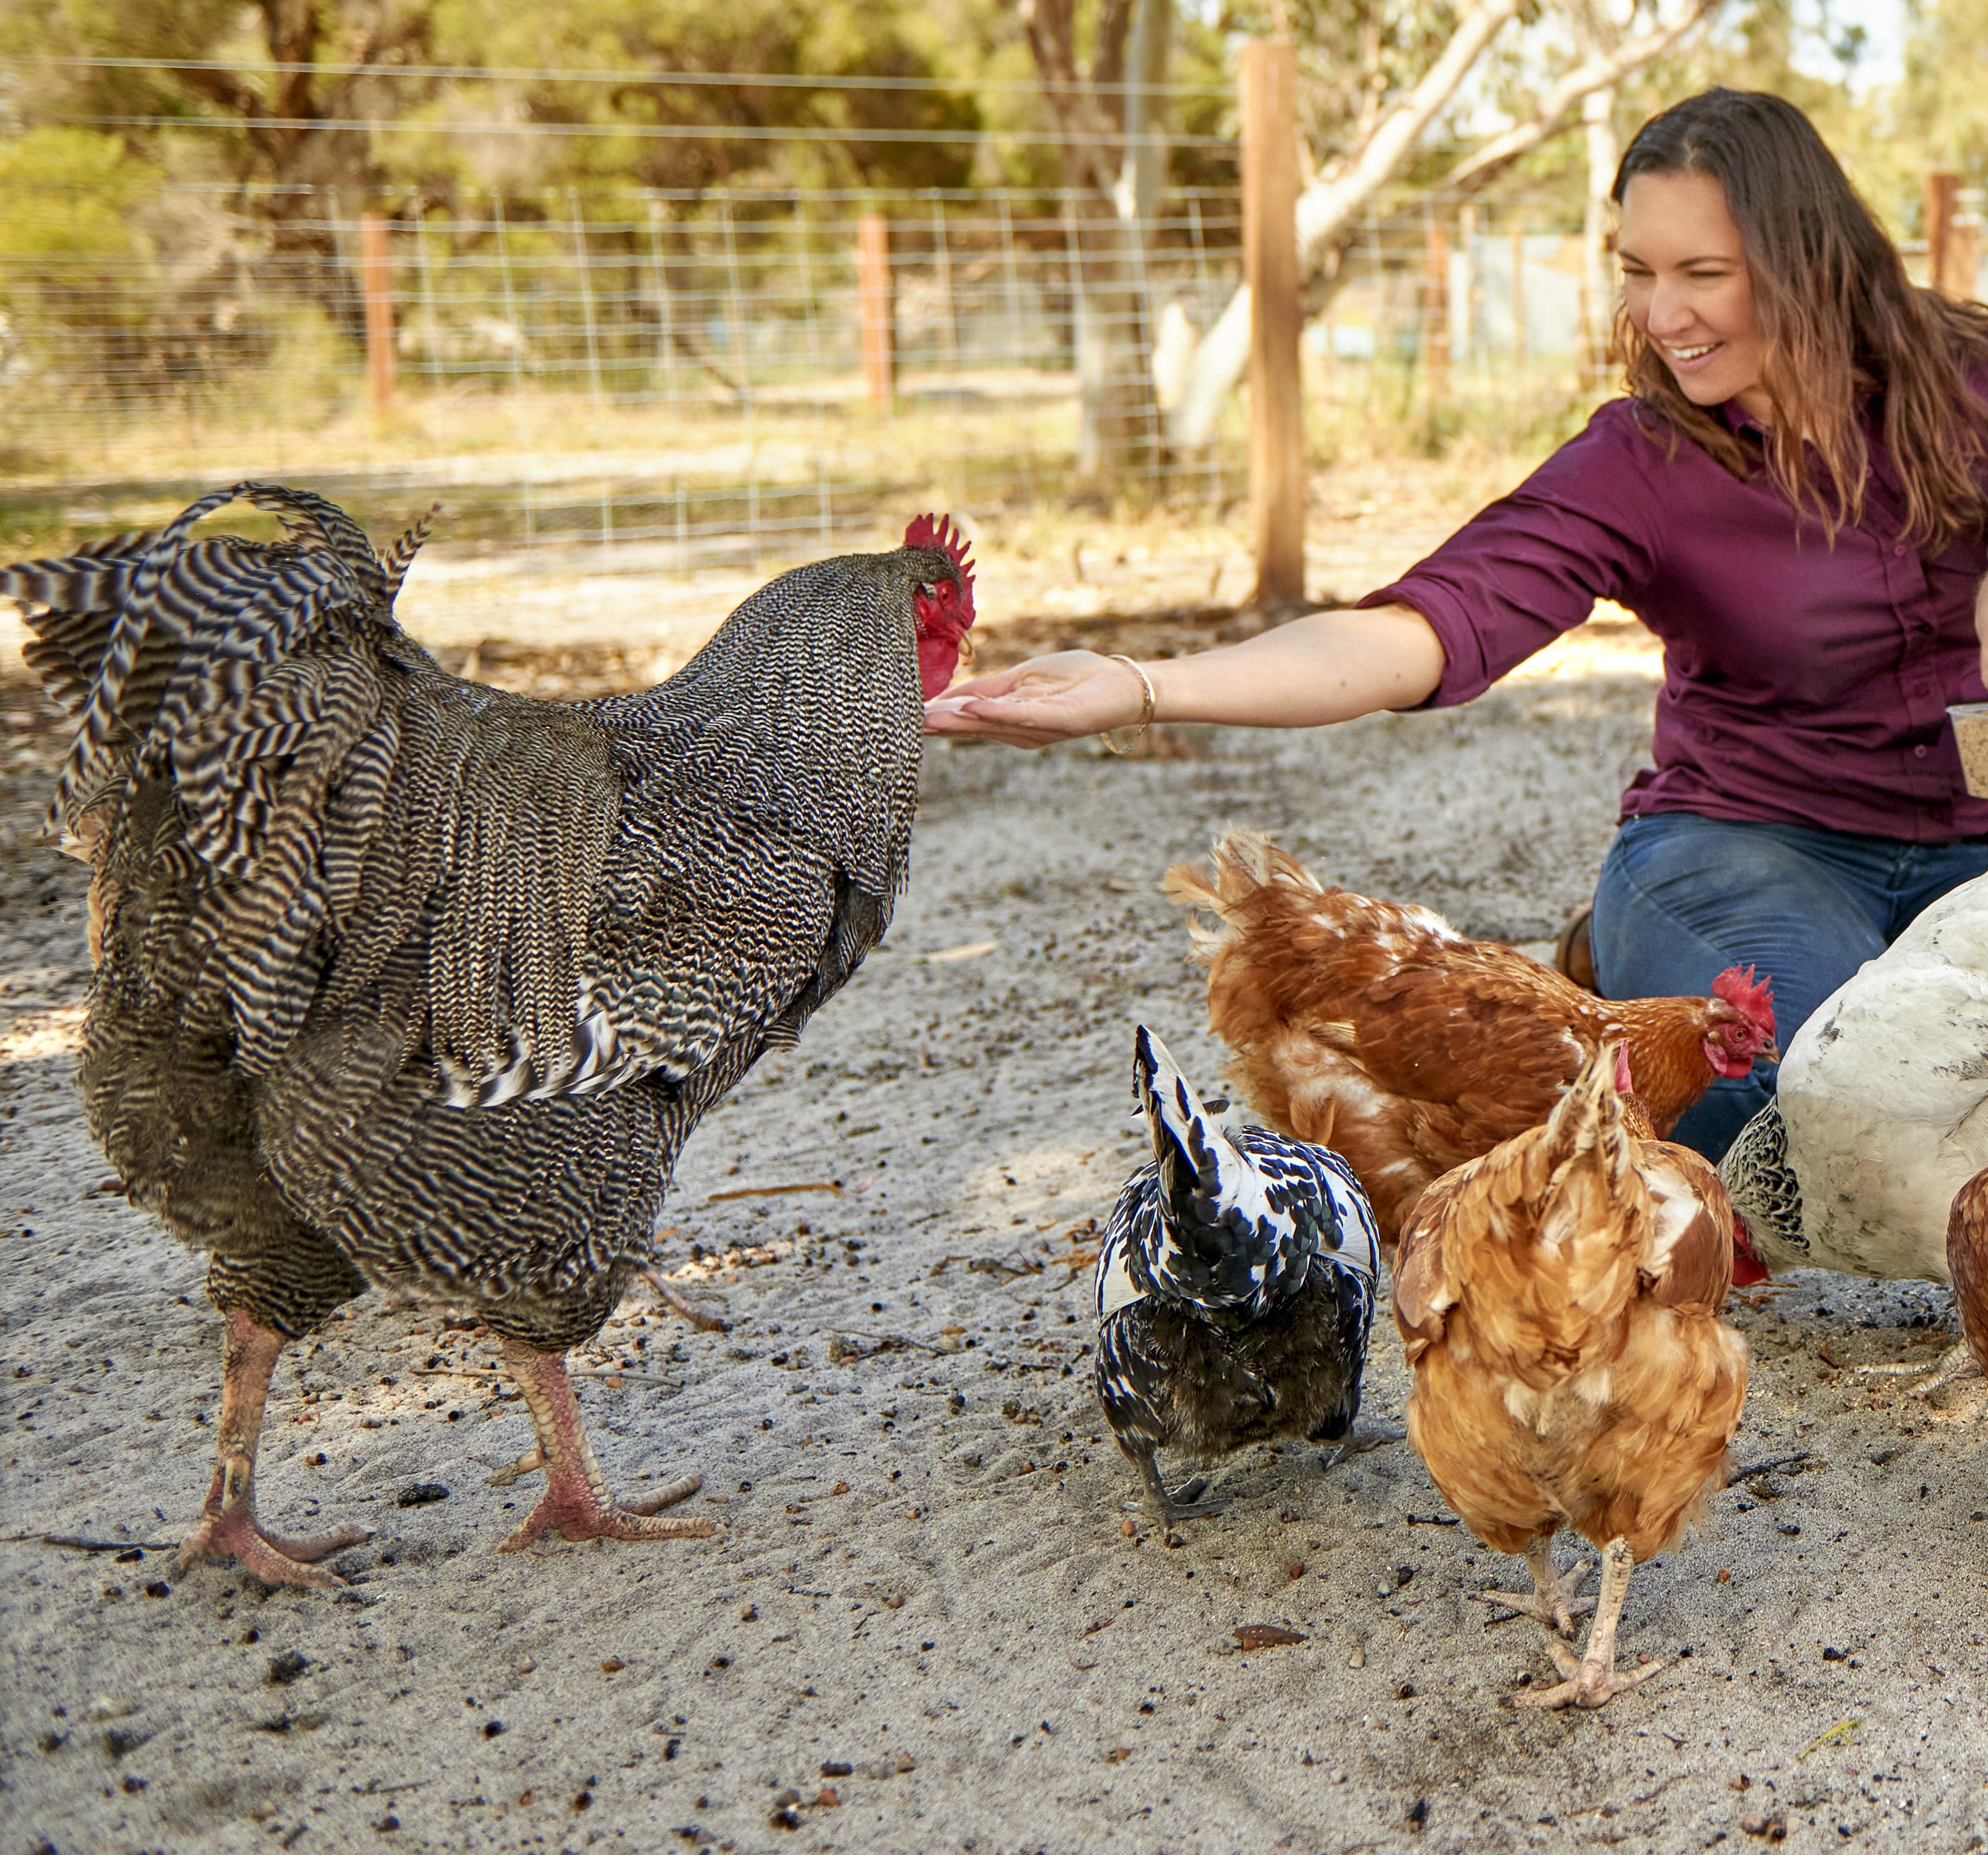 Helping Roosters in Need: 